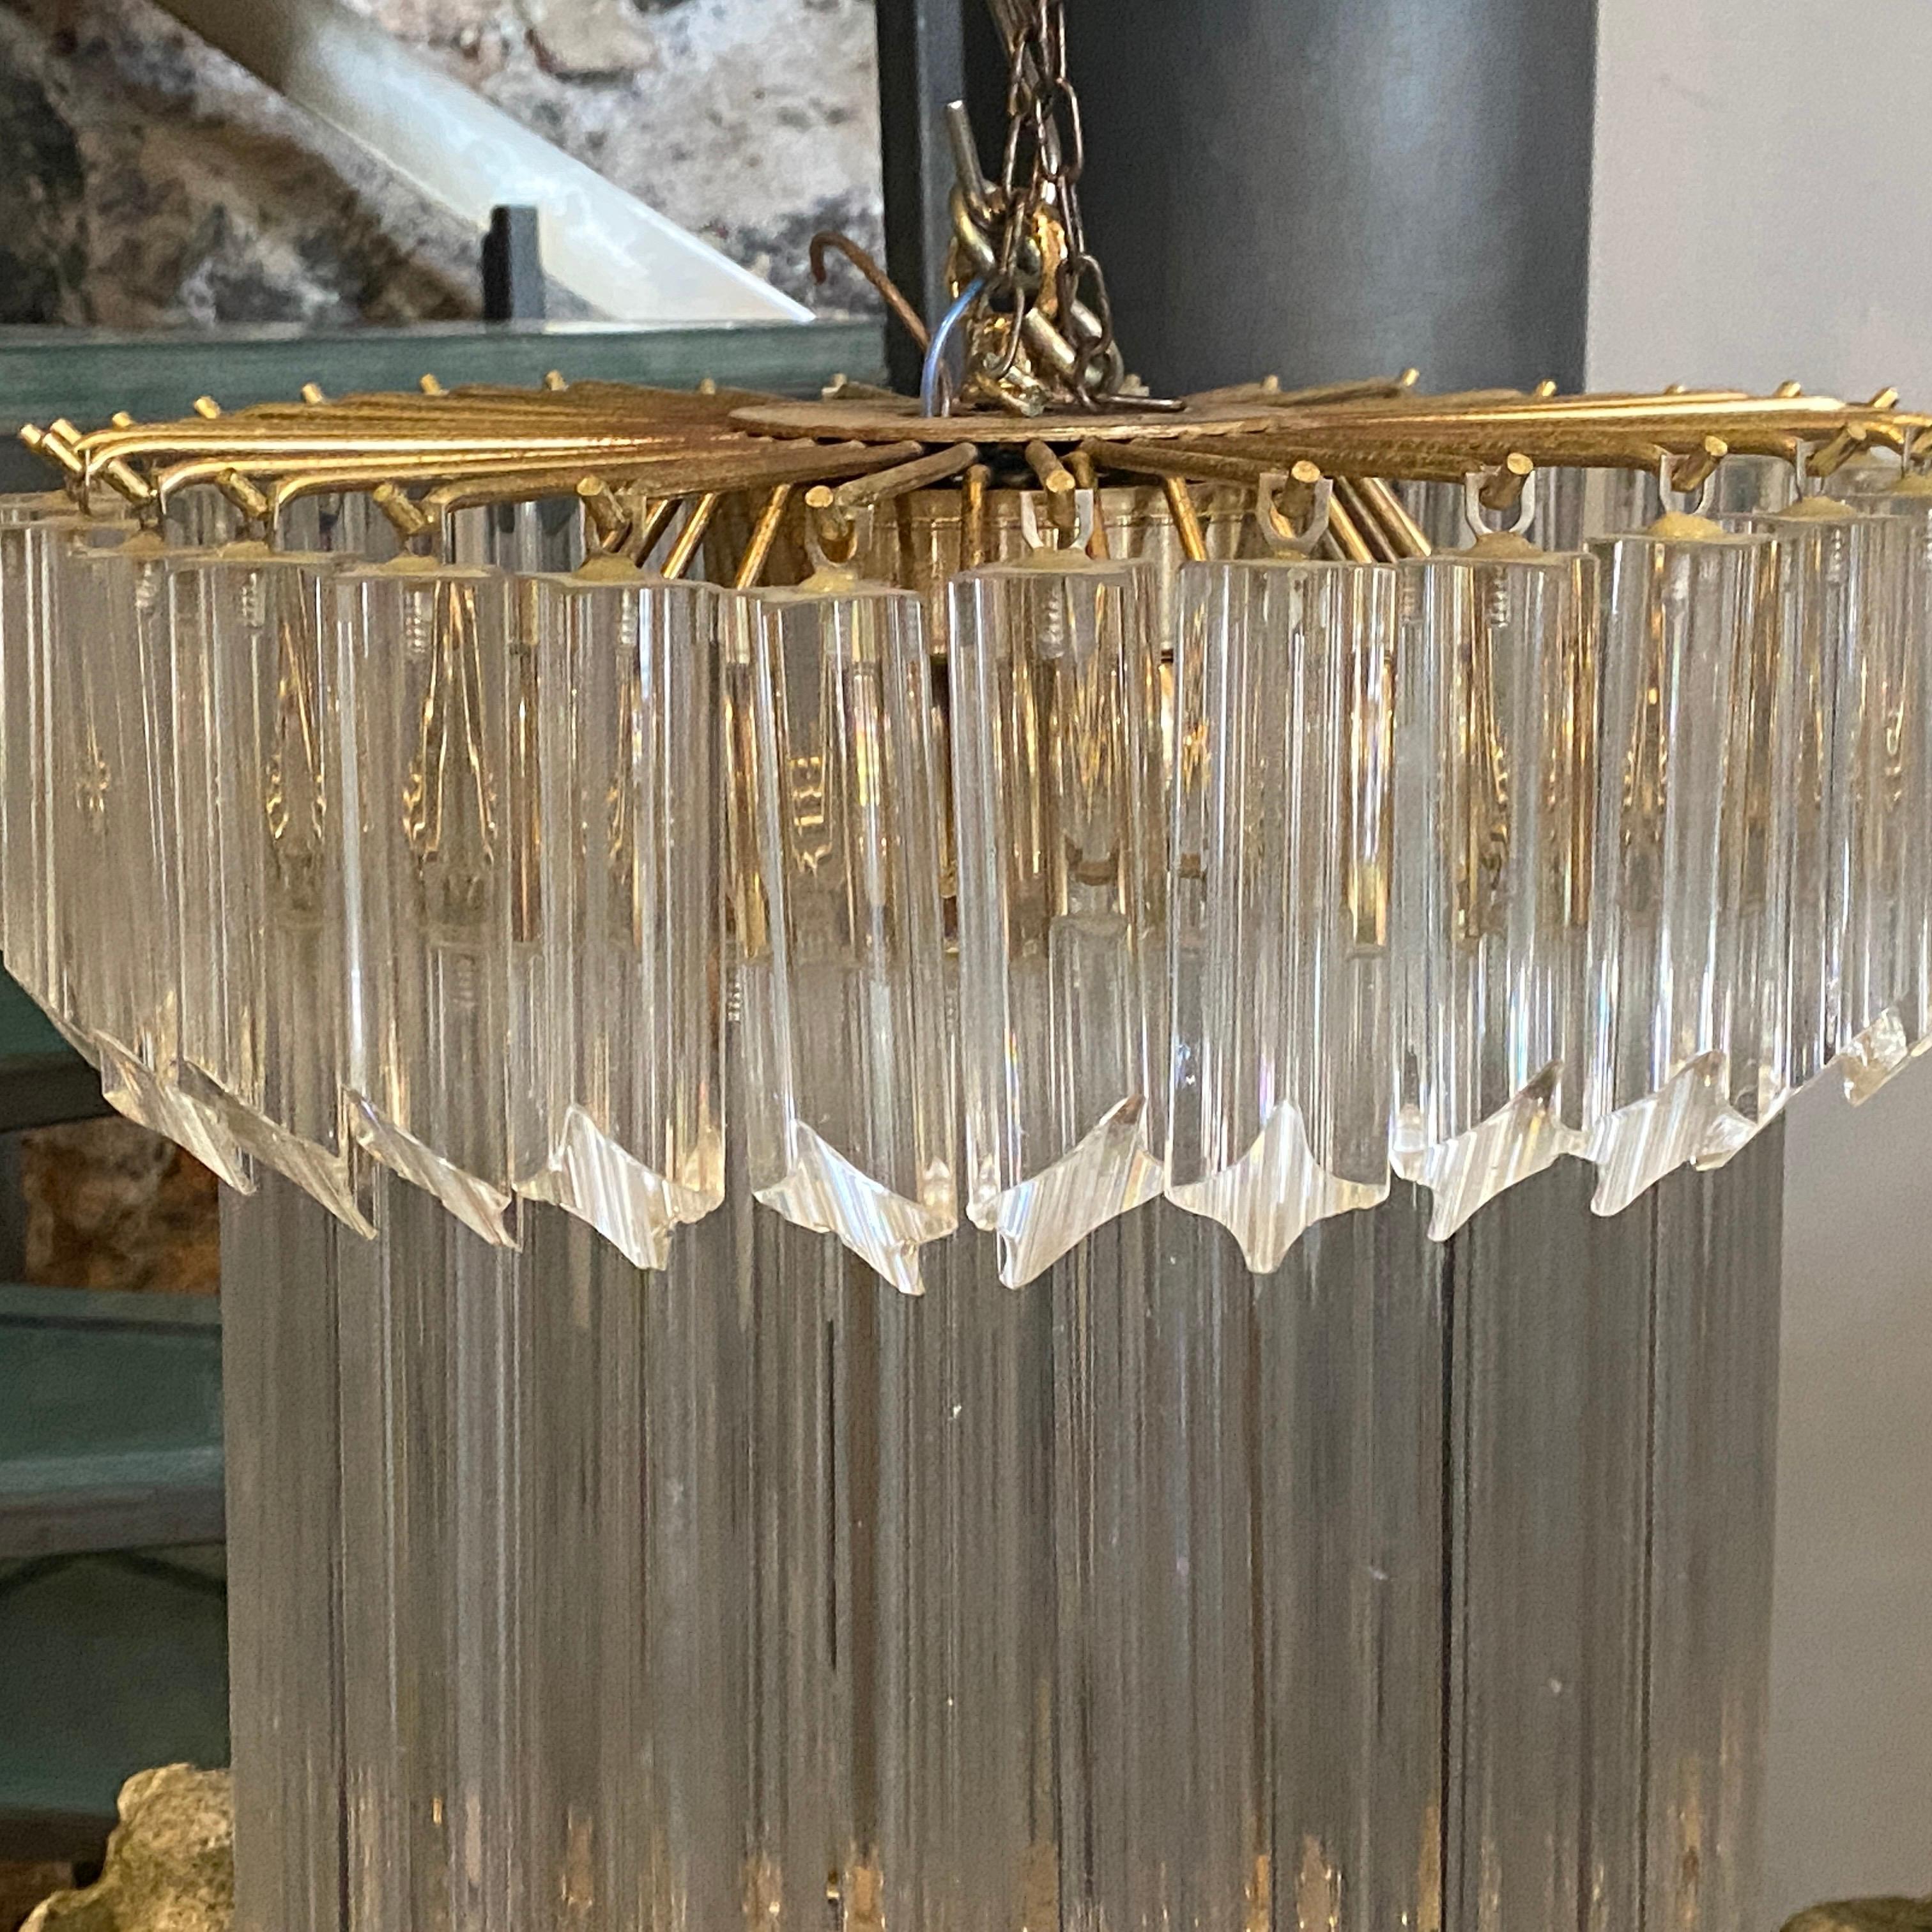 This chandelier is made up of an elegant solid glass prisms mounted on a brass base. Each murano glass, giving you a soft warm light. We should note that any amount of chain can be added to customize the length of the chandelier. It's made by Venini